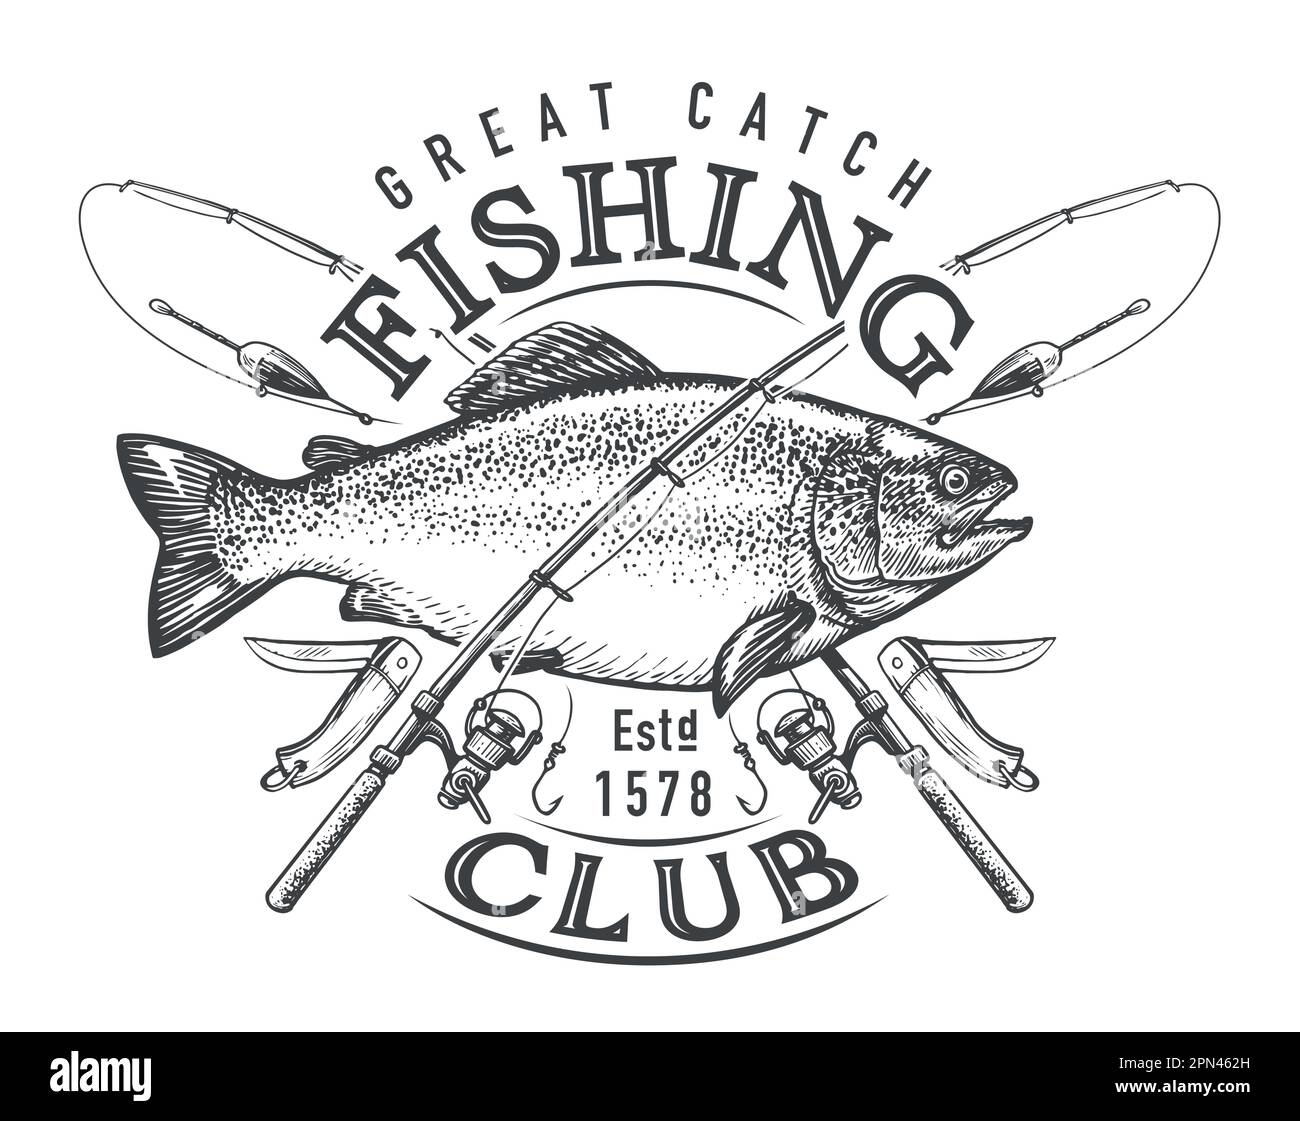 Fishing club emblem. Outdoor sports lifestyle concept. Great fish catch, sketch vector illustration Stock Vector